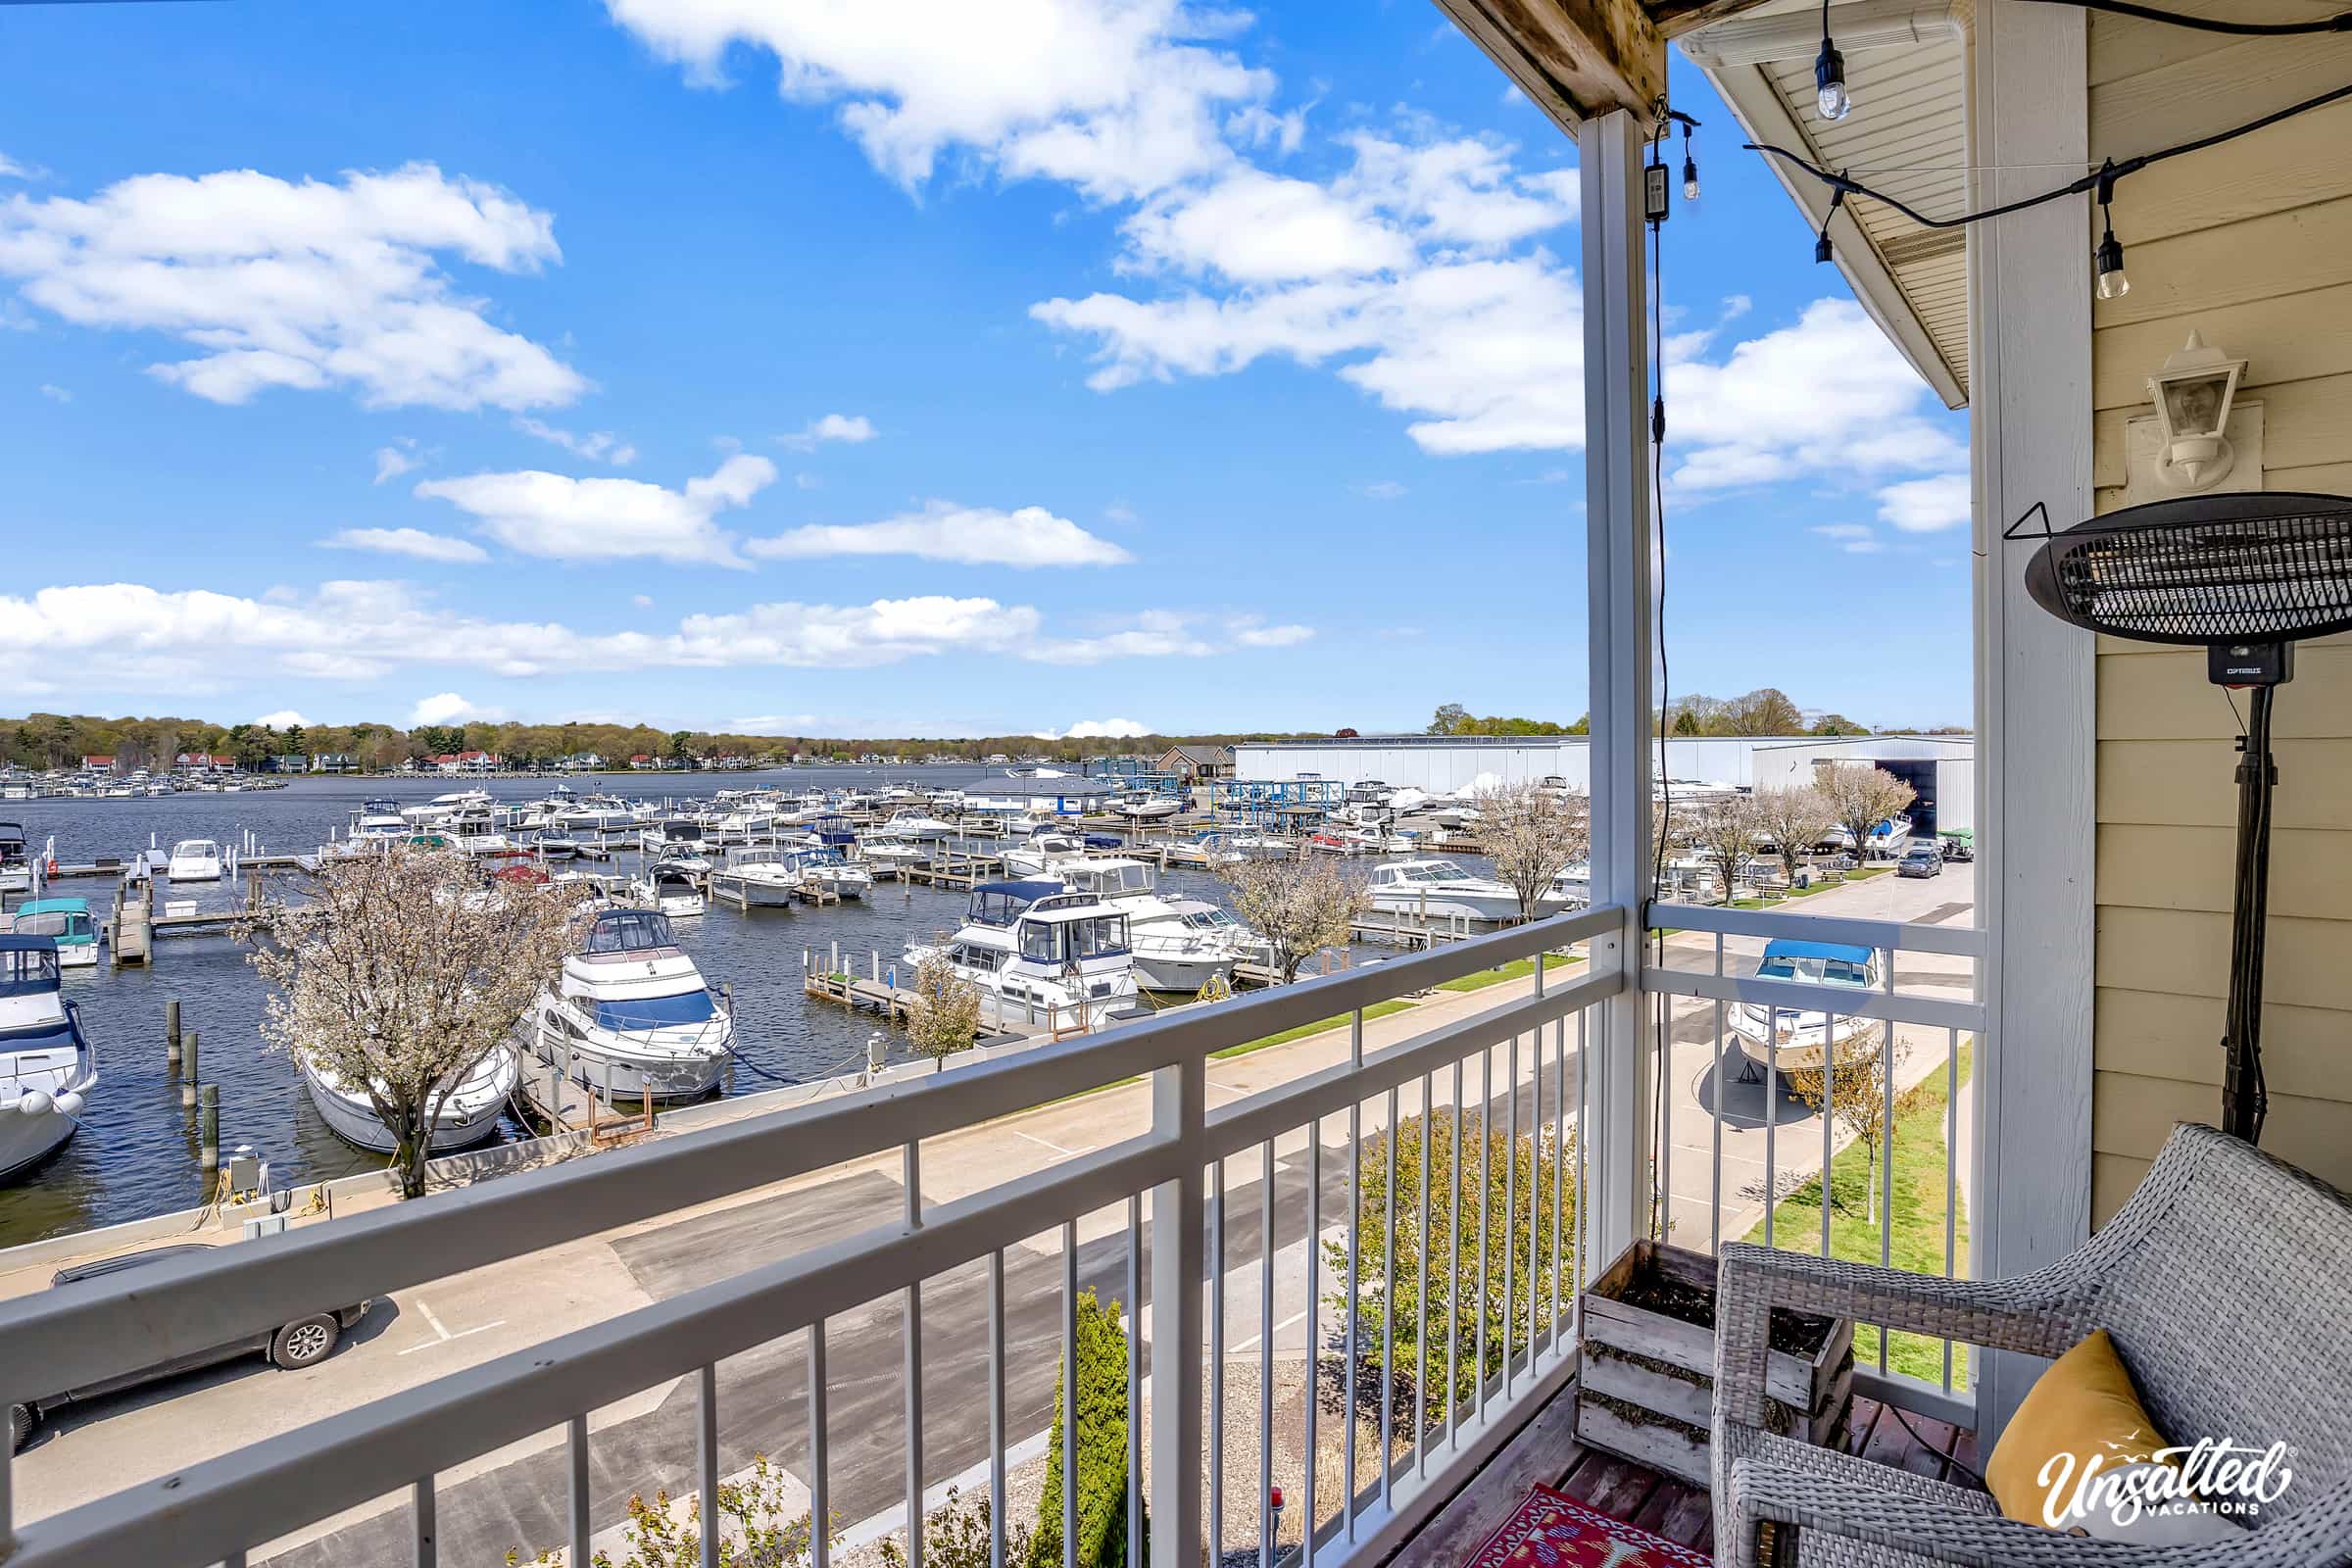 Large Balcony Looking out over Spring Lake and Marina